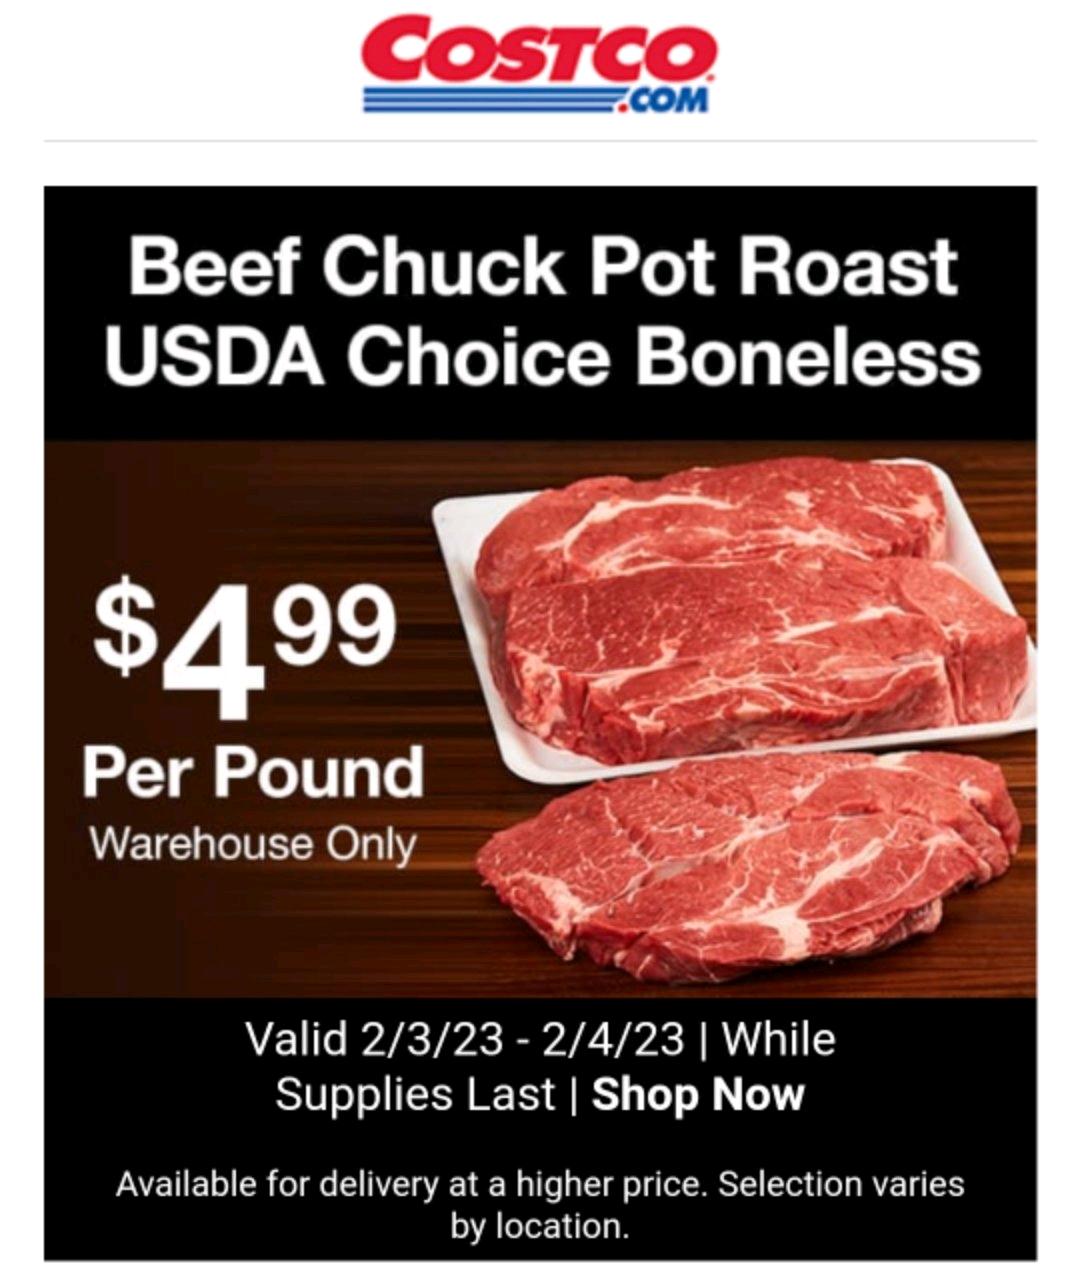 USDA Organic Beef chuck pot roast at #Costco #sfbay #gasline #hours #couponcode February 14, 2023